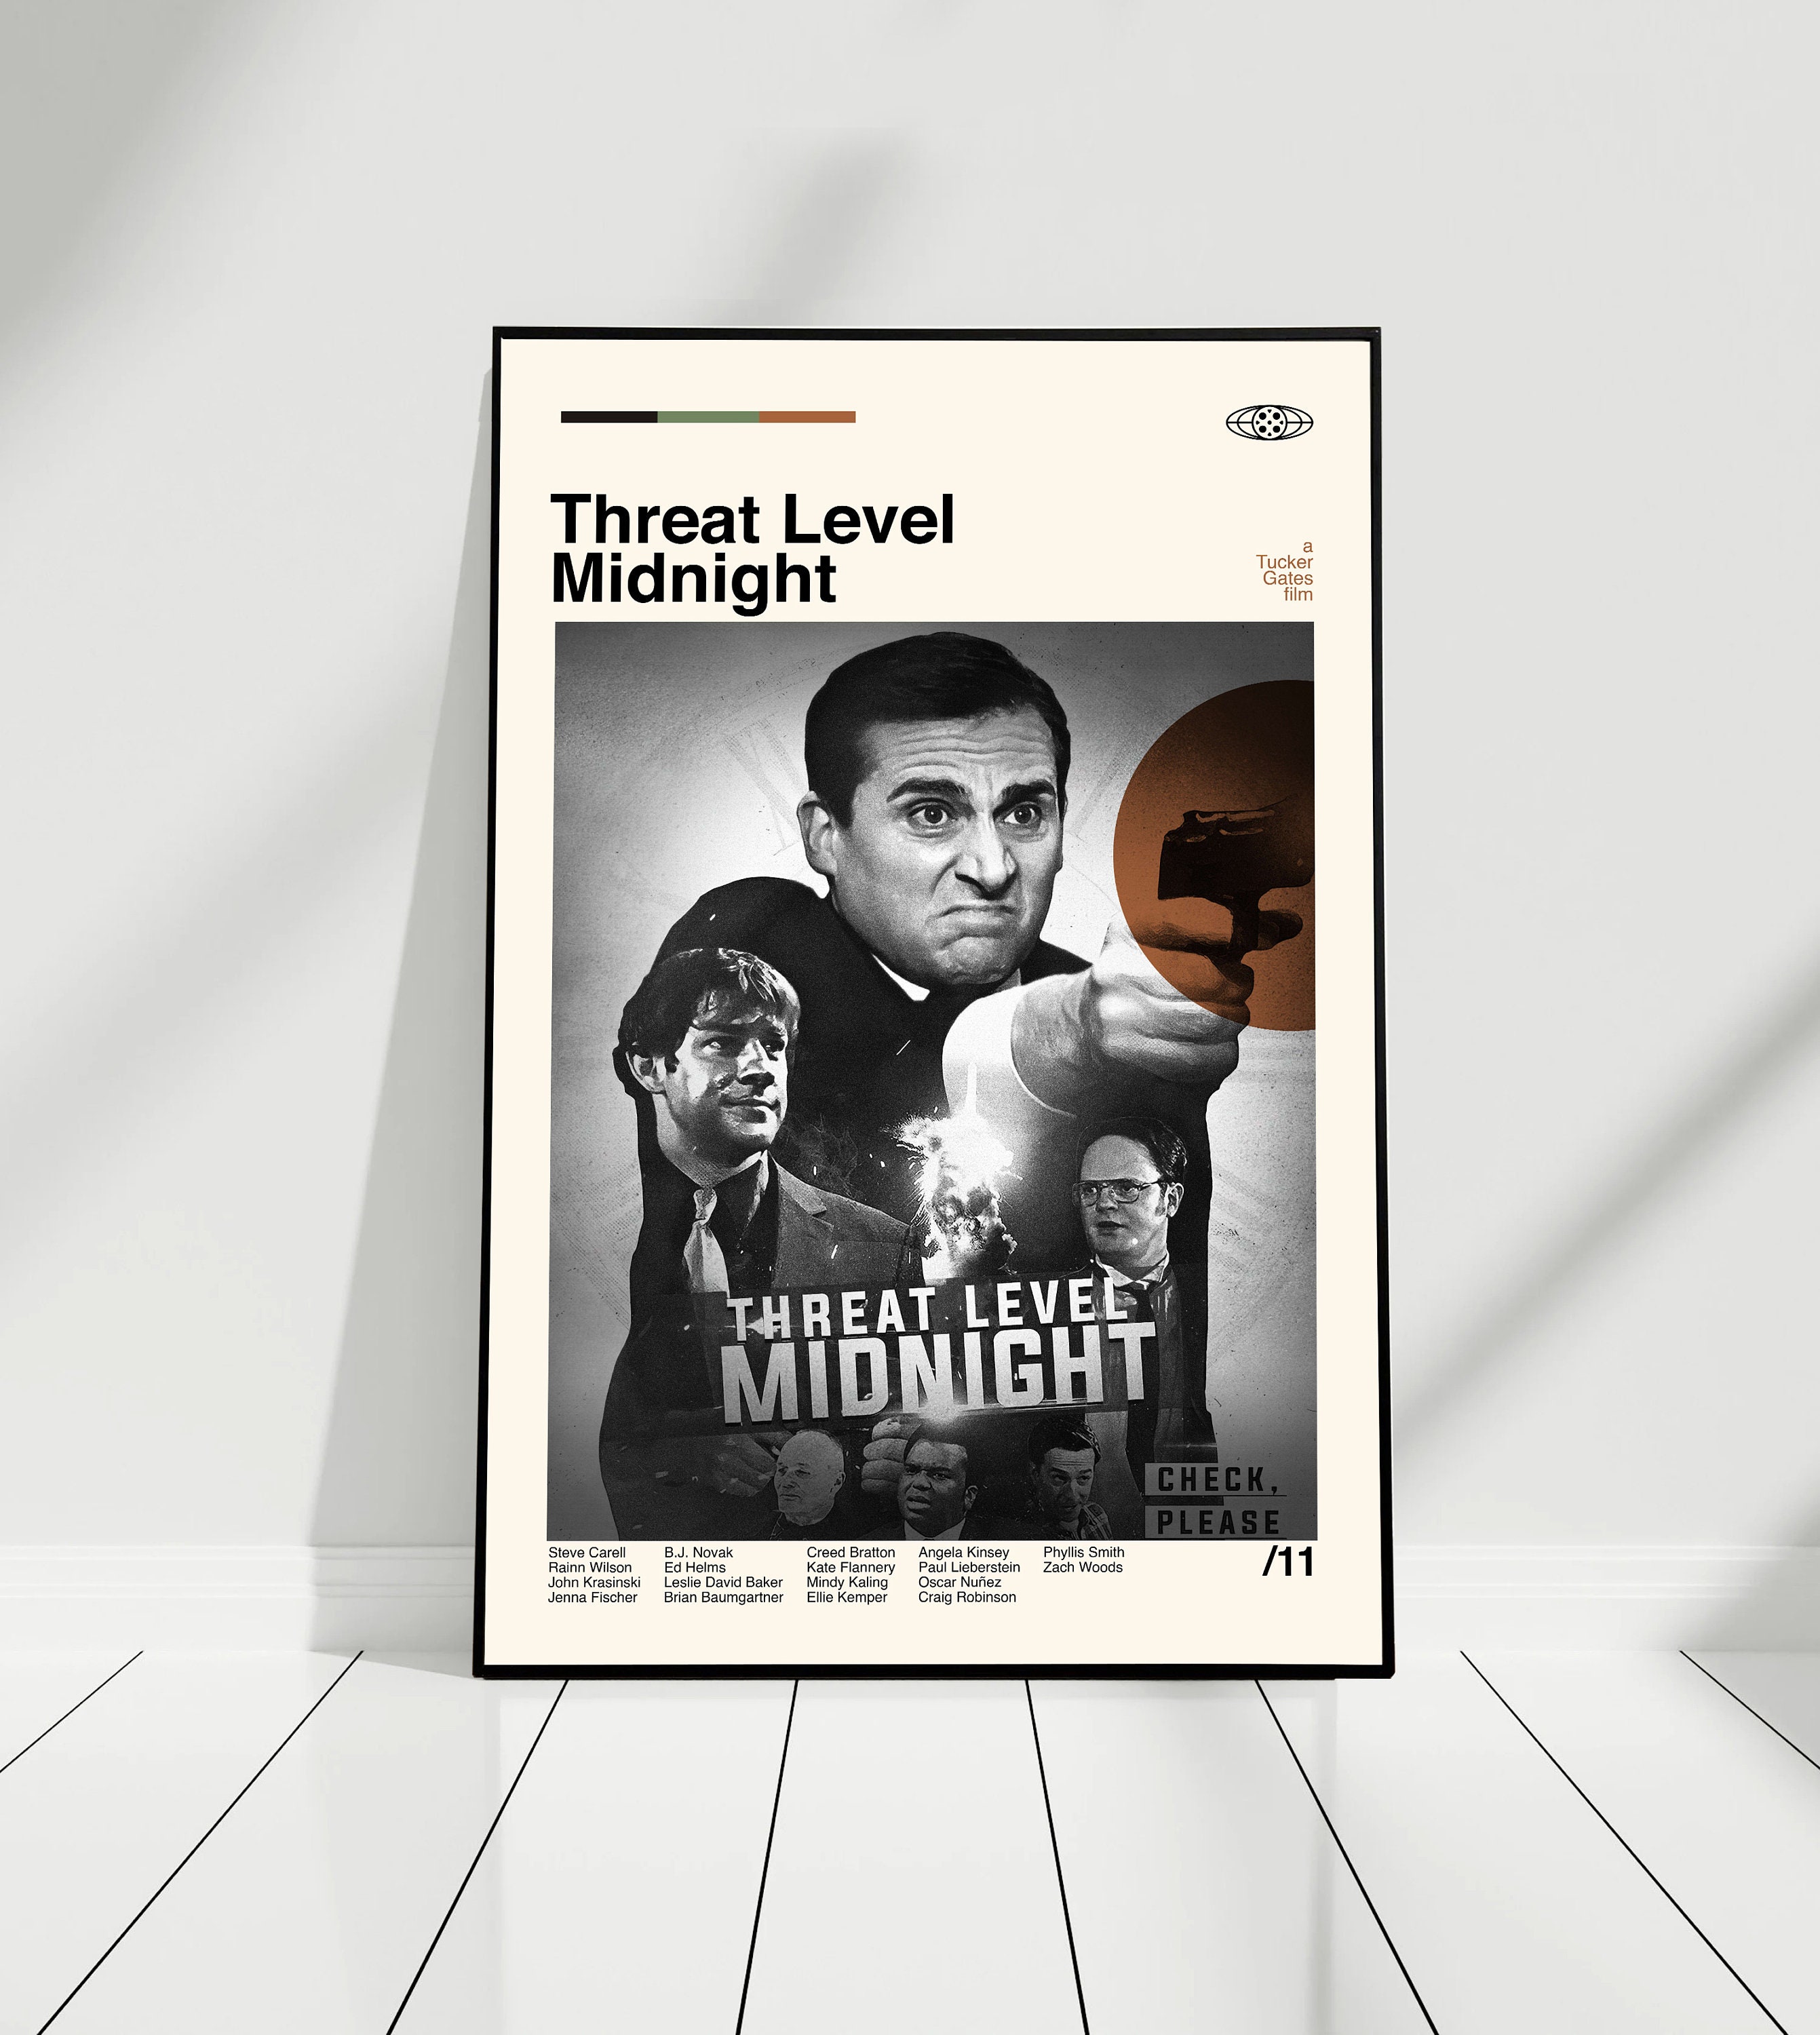 Discover THE OFFICE - Threat Level Midnight - TV Show Poster